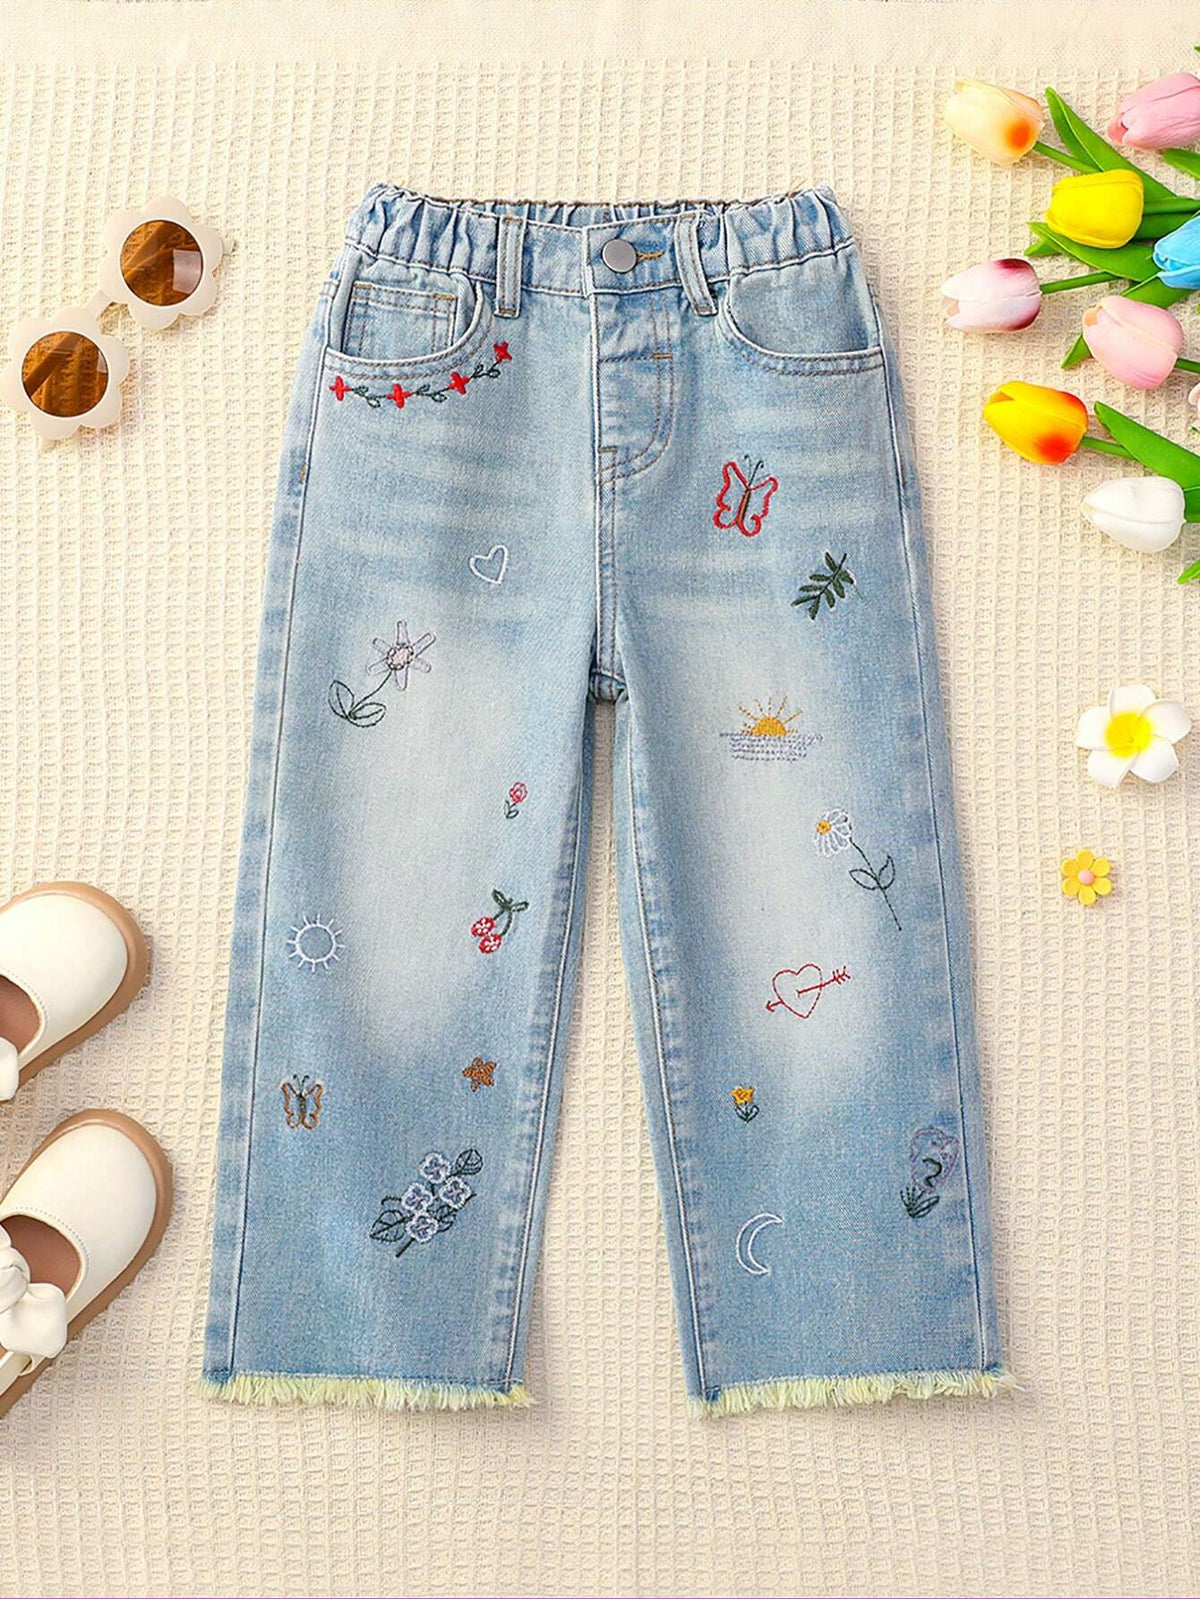 Vintage Washed Loose Straight-Leg Jeans For Girls With Lovely Heart, Flower And Butterfly Embroidery, Fraying Edges And Design Sense